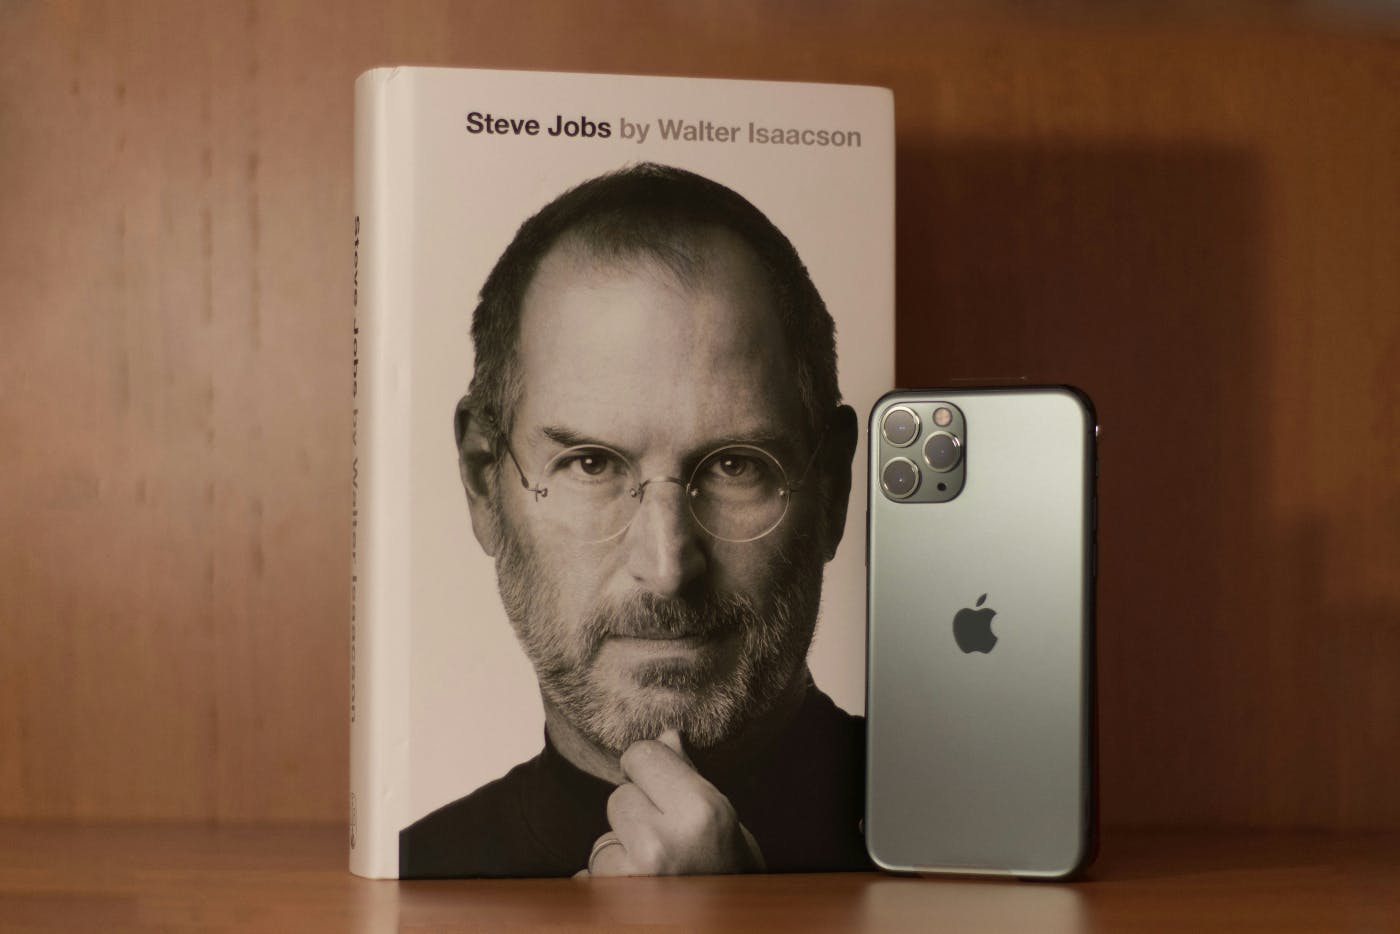 The Biography of Steve Jobs and an iPhone on a shelf